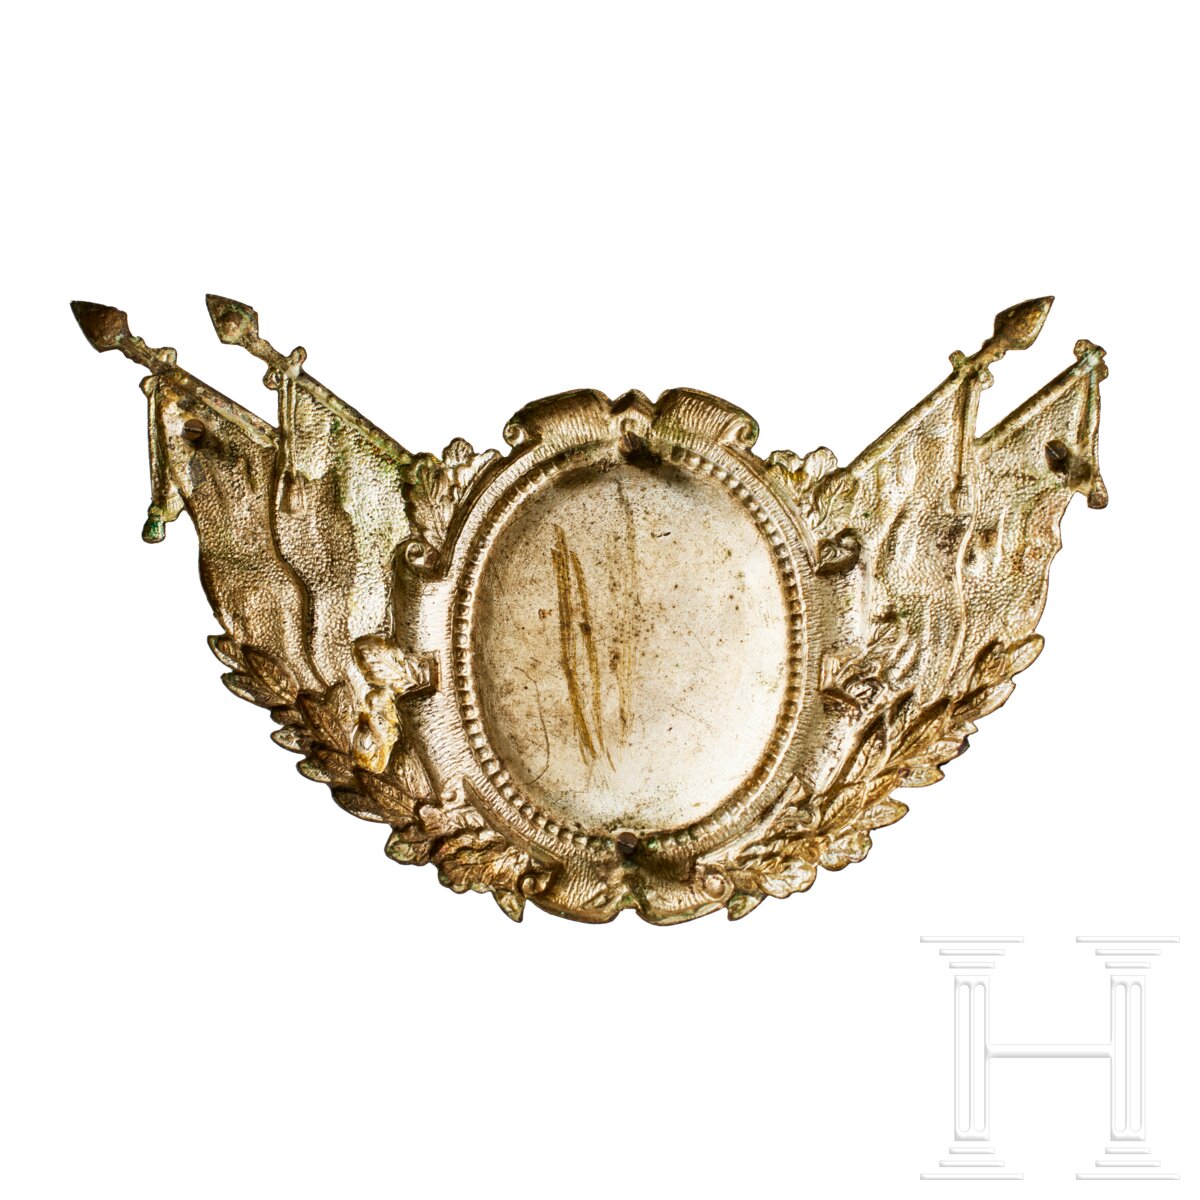 A Prussian Veteran Shooting Club Gorget Center Trophy - Image 2 of 3